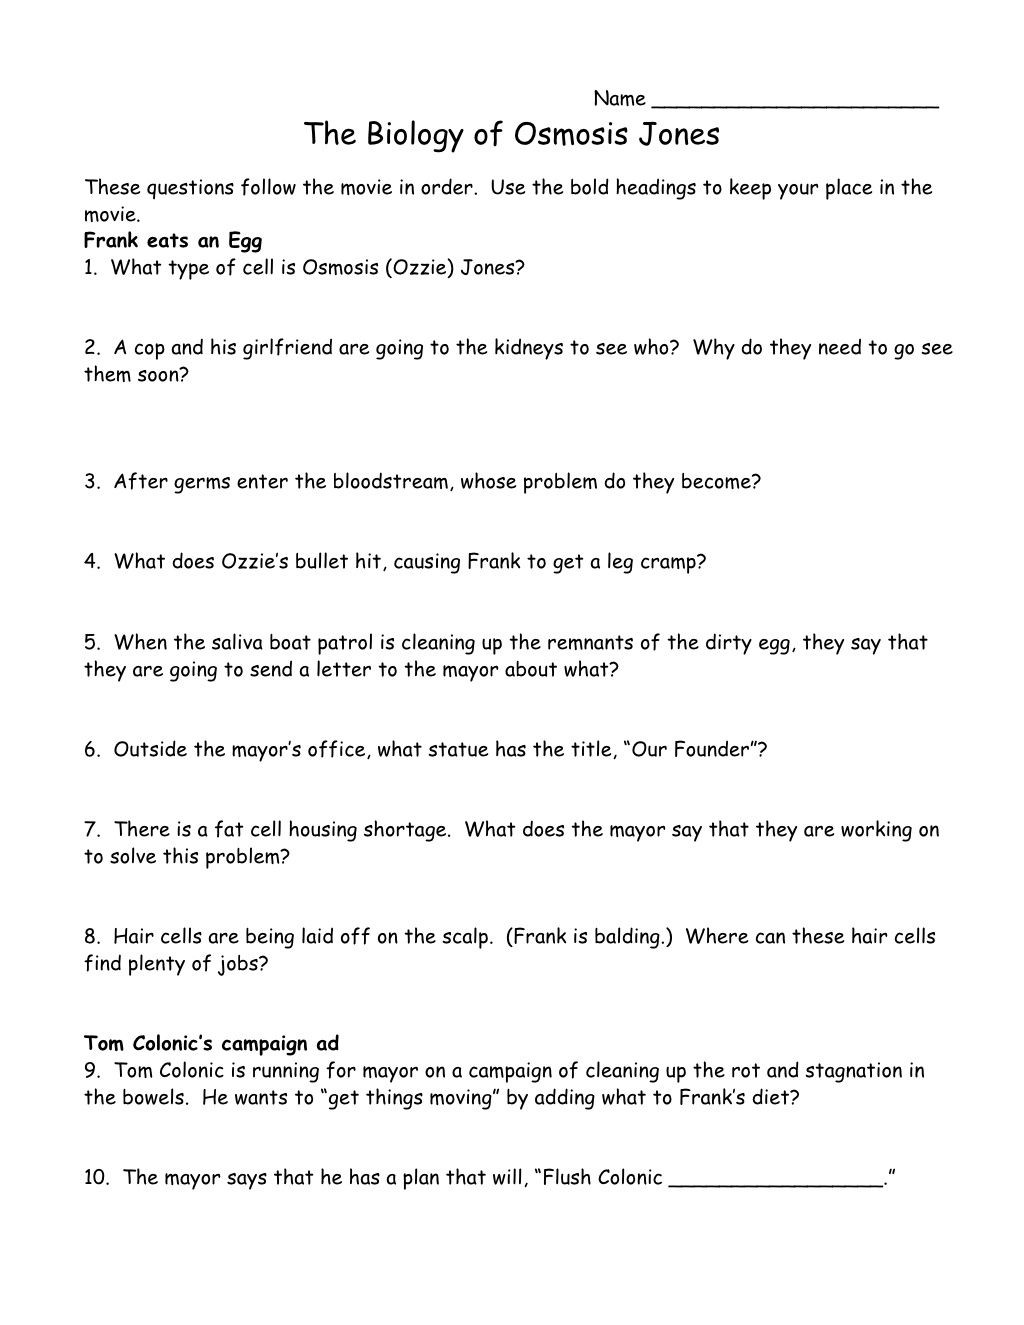 Osmosis Jones Movie Worksheet Name the Biology Of Osmosis Jonesthese Questions Follow the